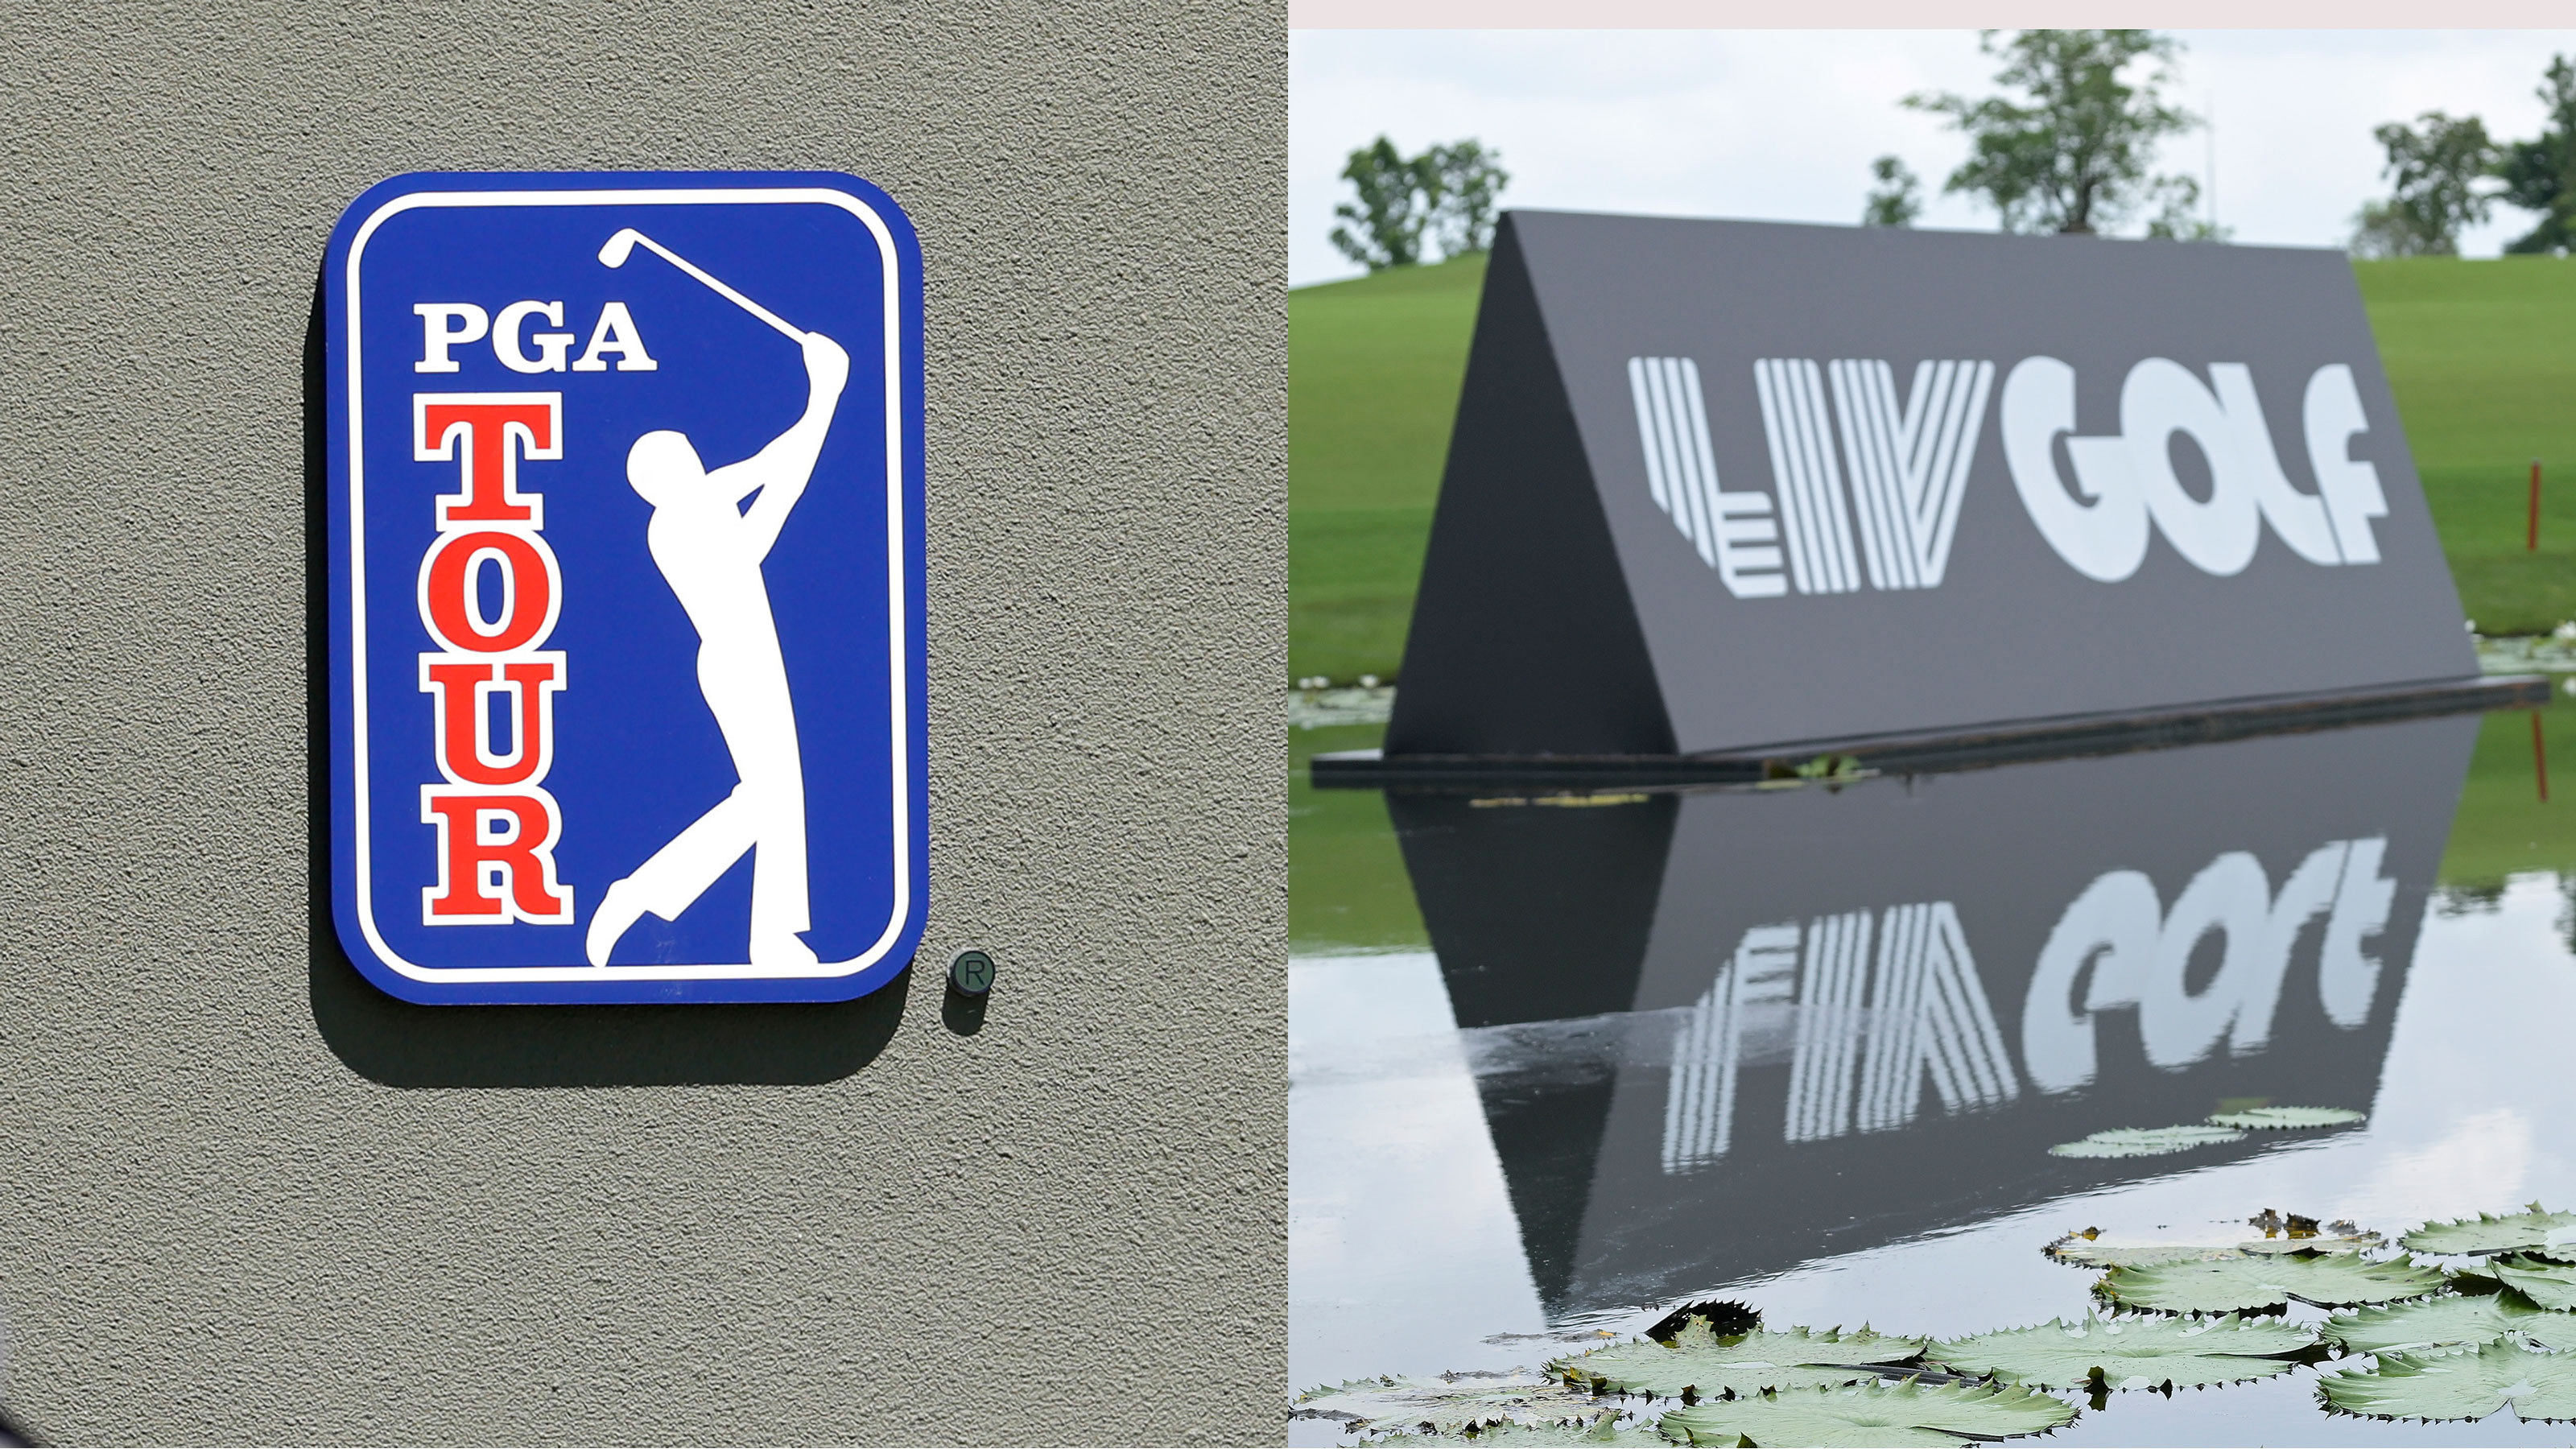 15 lingering questions you might have about the PGA Tour-LIV Golf deal,  with one-sentence answers | Golf News and Tour Information | GolfDigest.com